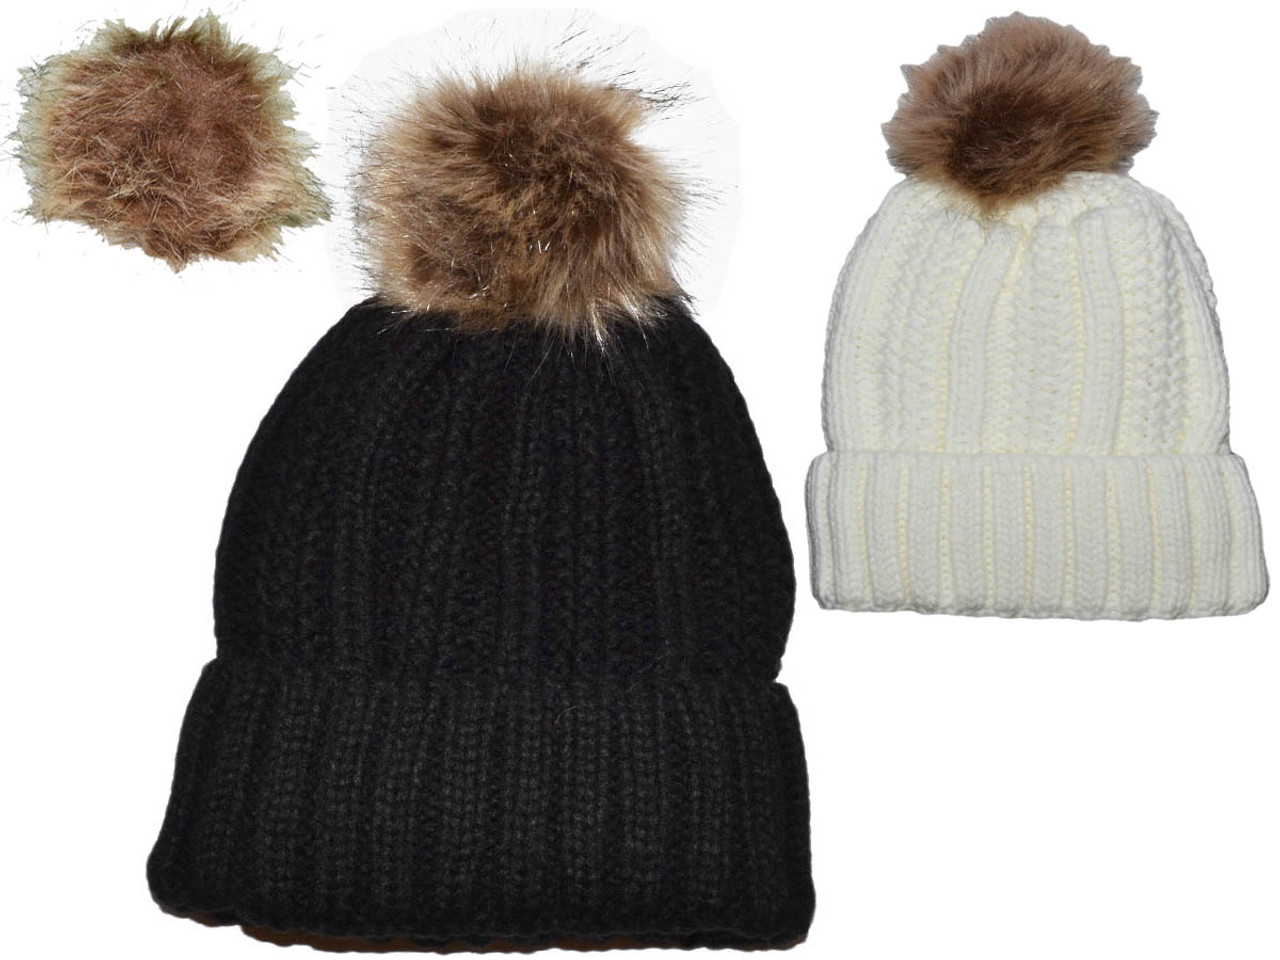 *Youth Size* Winter Beanie W/Raccoon Fur Pom-Pom - Extra Warm Lined Interior Long Knit Thick Ribbed Cuffed Soft Youth Beanie Hat - 5368